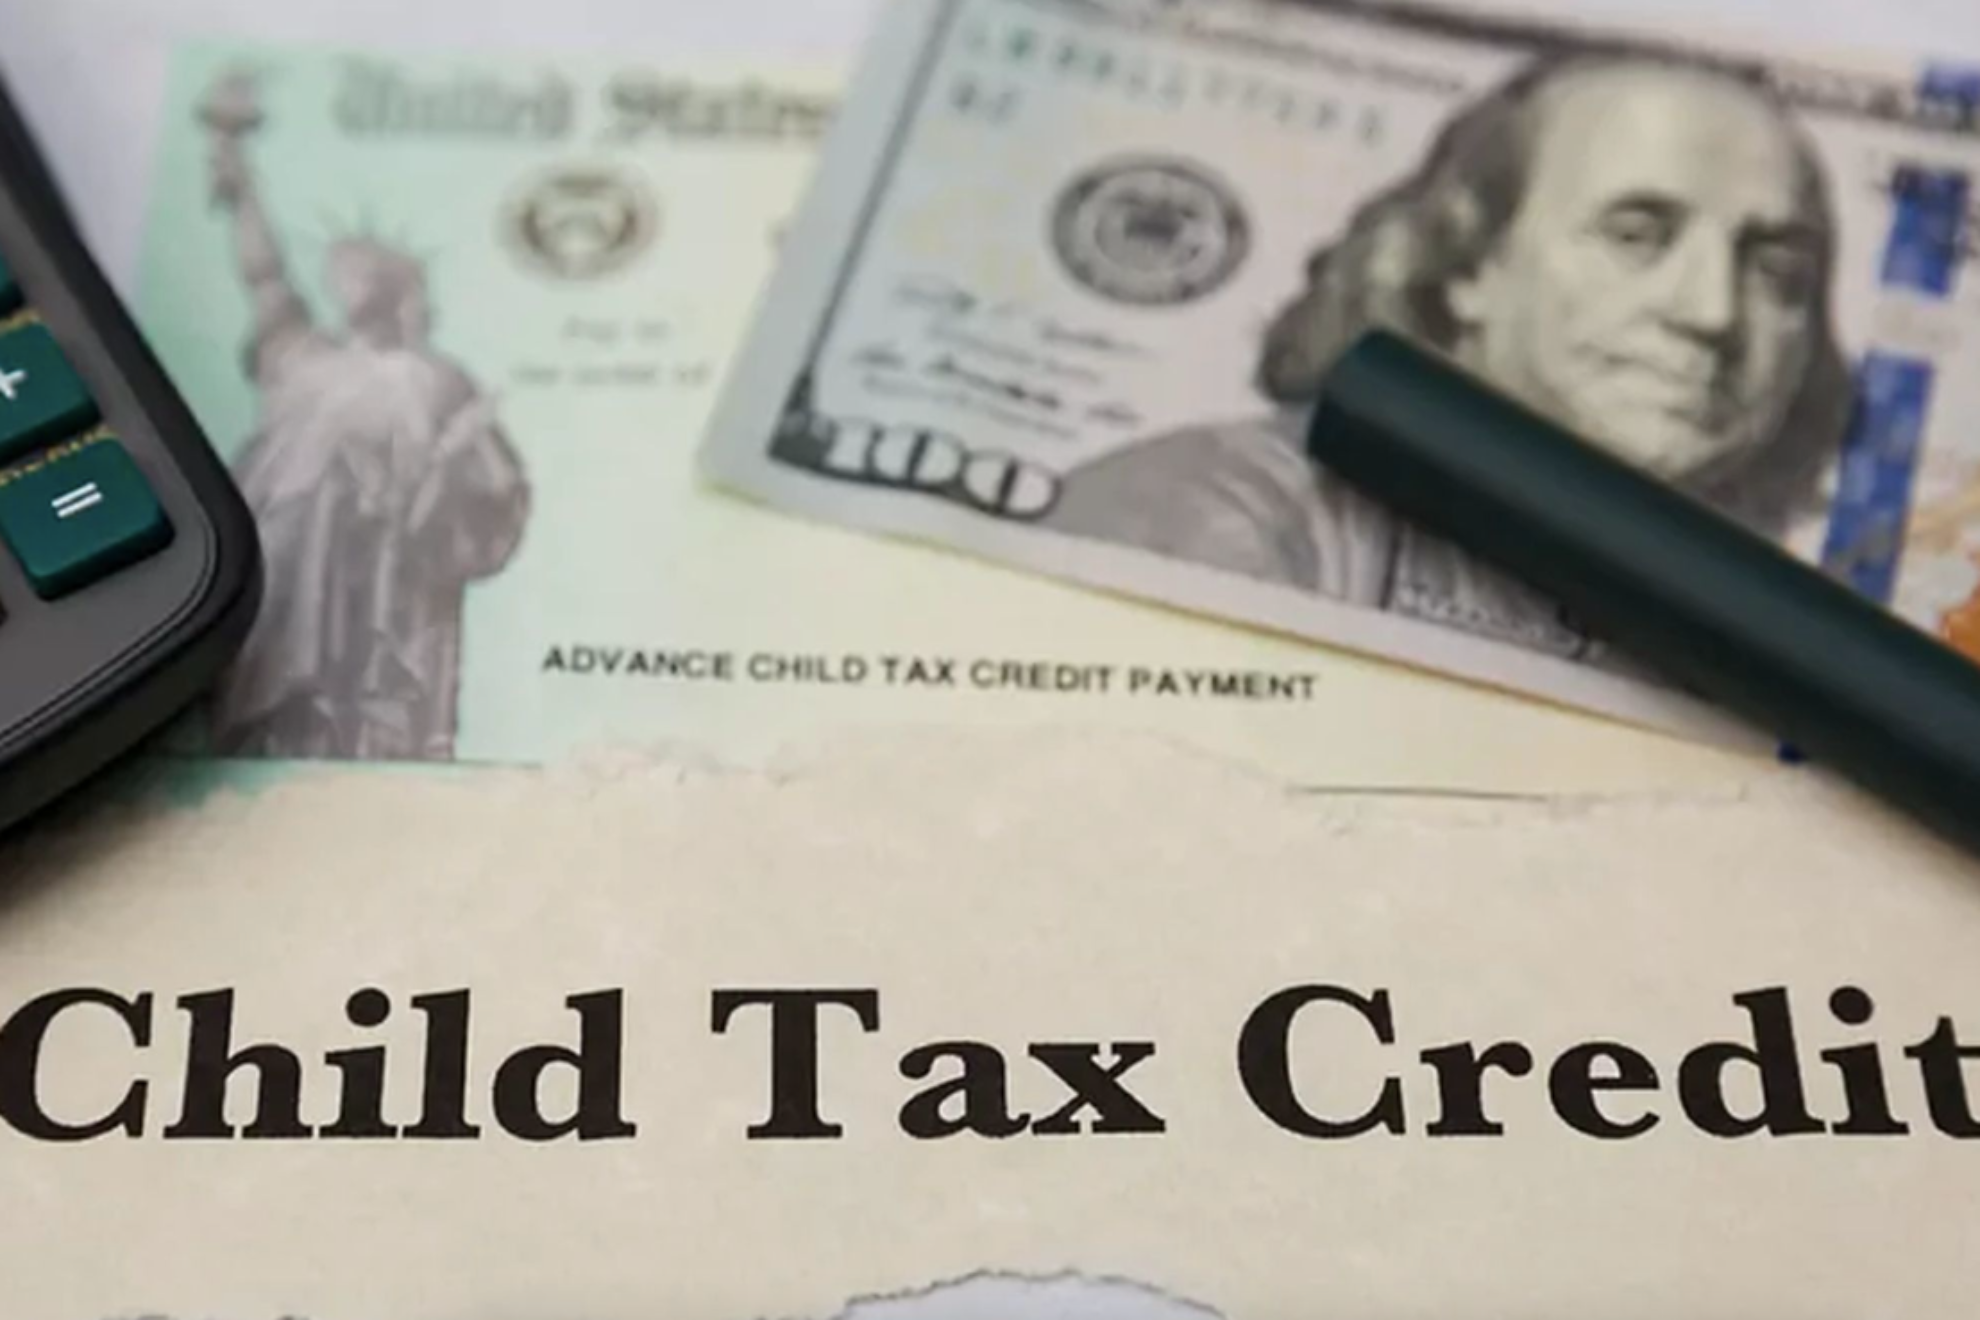 Child Tax Credit: Did you sign up for the $3600 payment? You're probably getting your payment this date